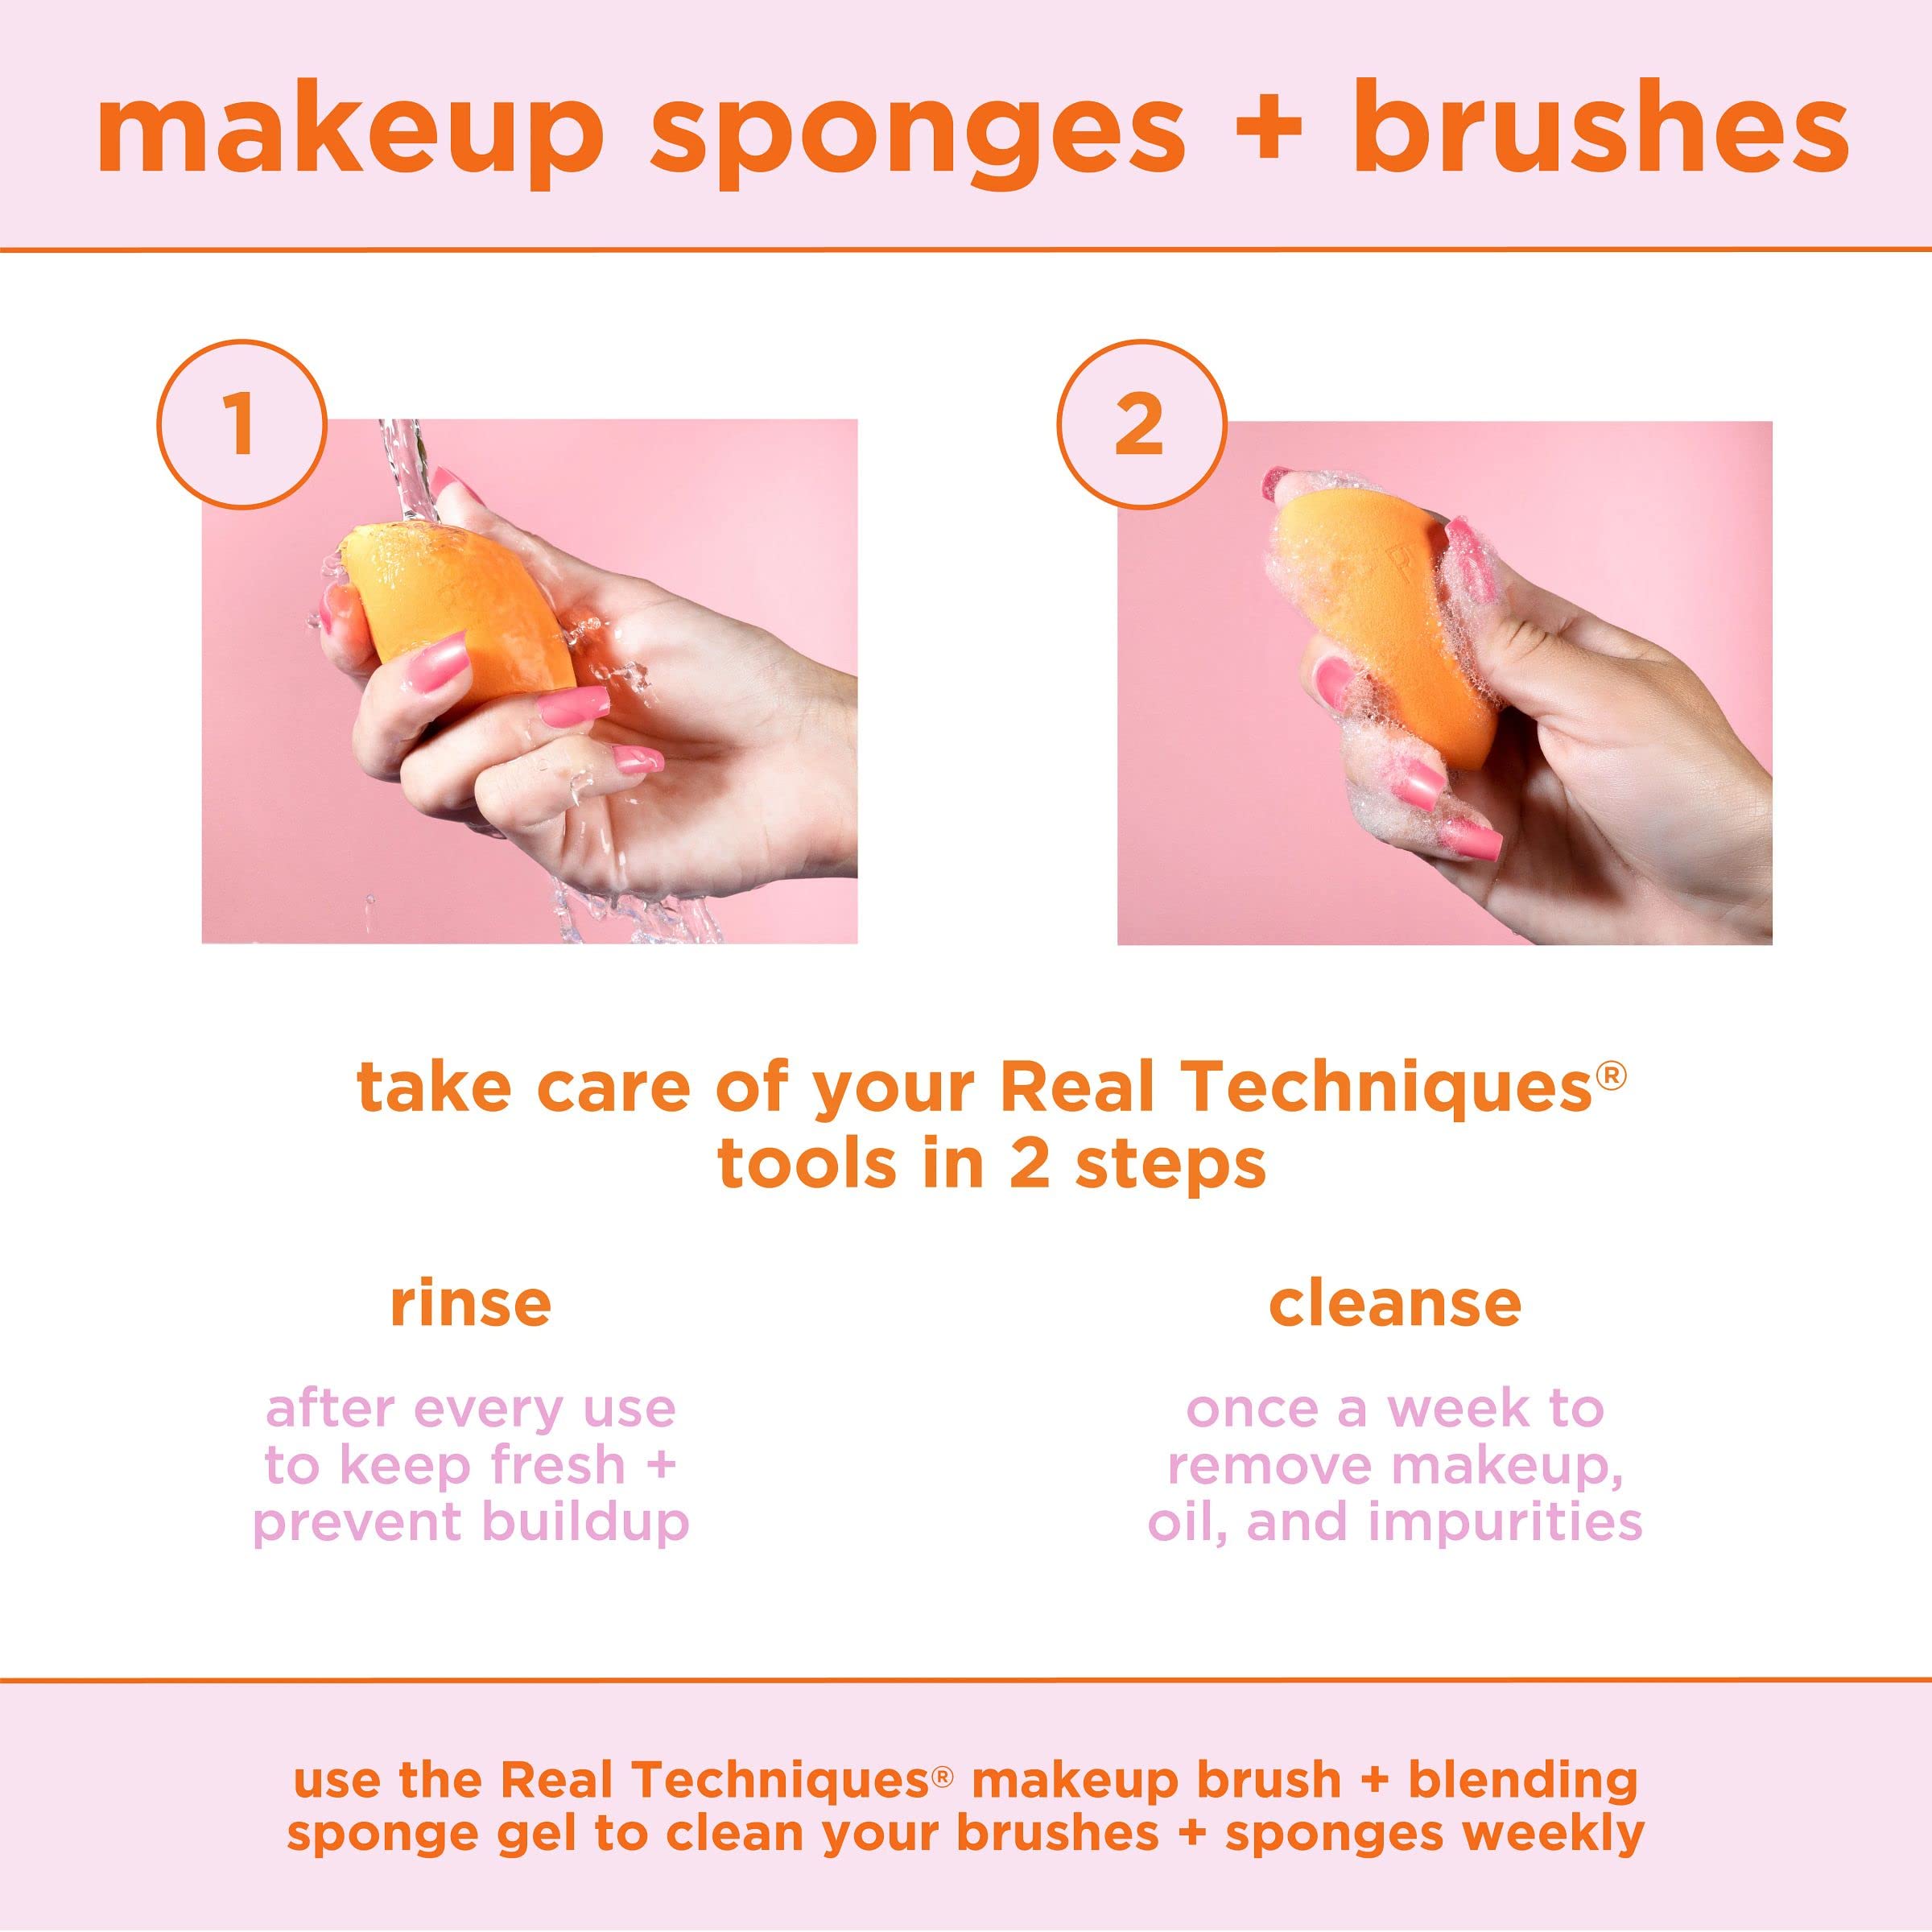 Real Techniques Miracle Complexion Sponge + Concealer Sponge Duo, Makeup Blending Sponges For Foundation & Concealer, Offers Light To Medium Coverage, Natural, Dewy Makeup, Latex-Free Foam, 2 Count